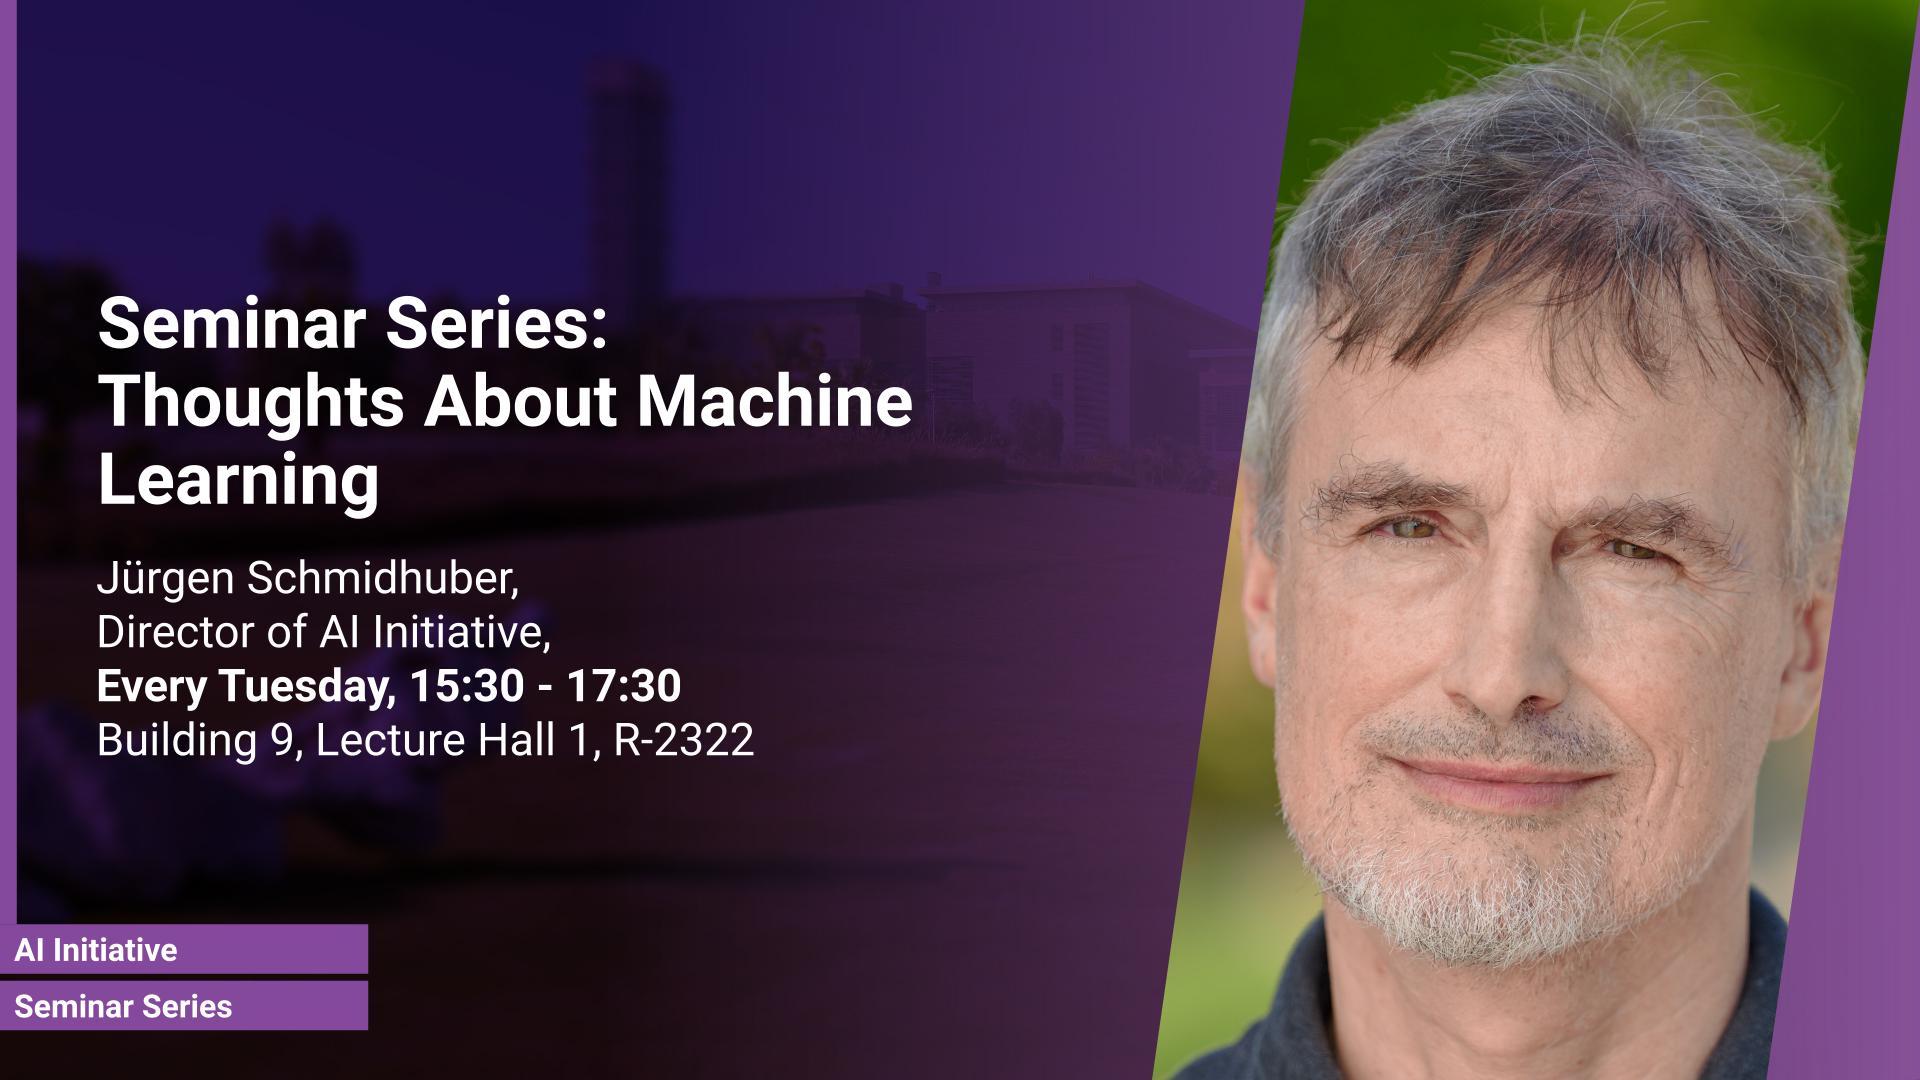 KAUST-CEMSE-AI INITIATIVE-Thoughts-About-Machine-Learning-Week-Jürgen Schmidhuber